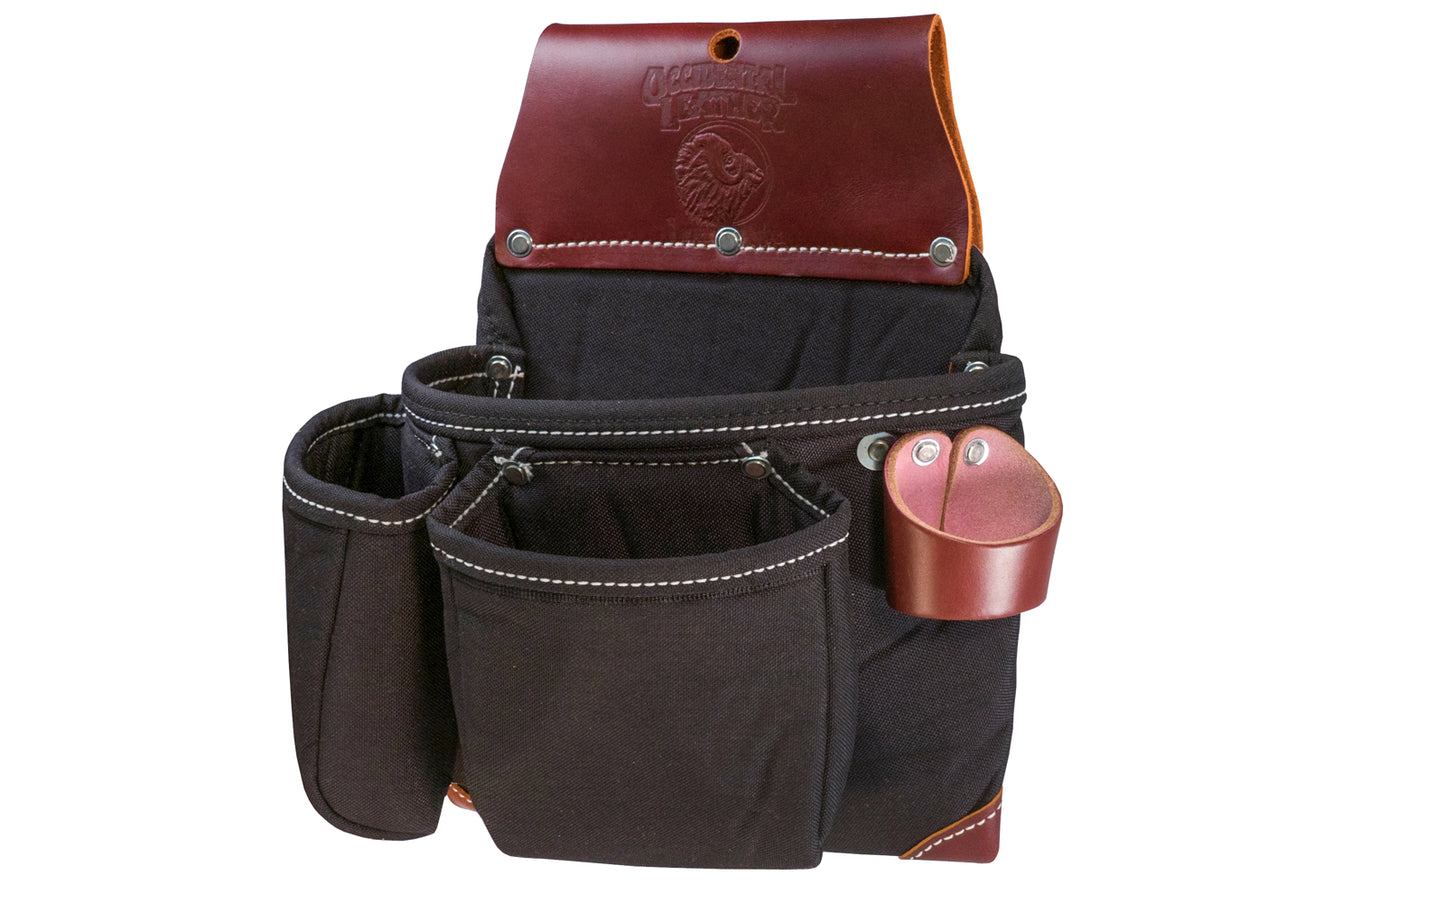 Occidental Leather 3-Pouch Tool Bag ~ Model B8017DB - Fits a 3" work belt - Pouch - Three pouch tool bag features holders for pencils, work knife, chisel, level, lumber crayon, heavy duty hammer loop. Main tool bag corners are reinforced with Occidental's trademark "OxyRed" leather. Made of Nylon & genuine Leather